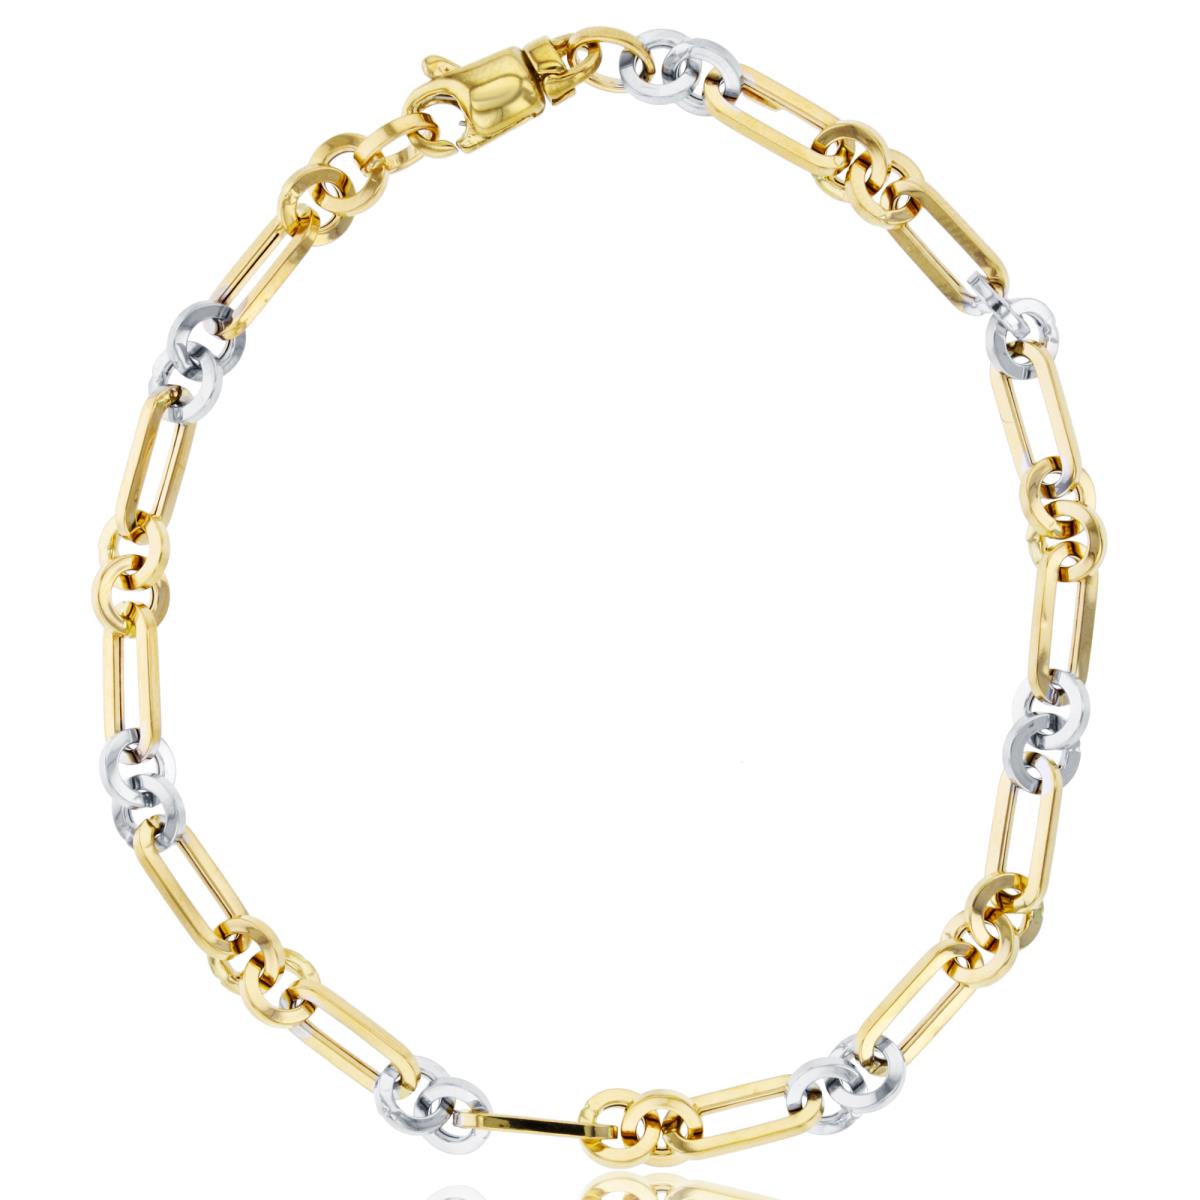 14K Two-Tone Gold Round & Oval Link 8.25" Chain Bracelet